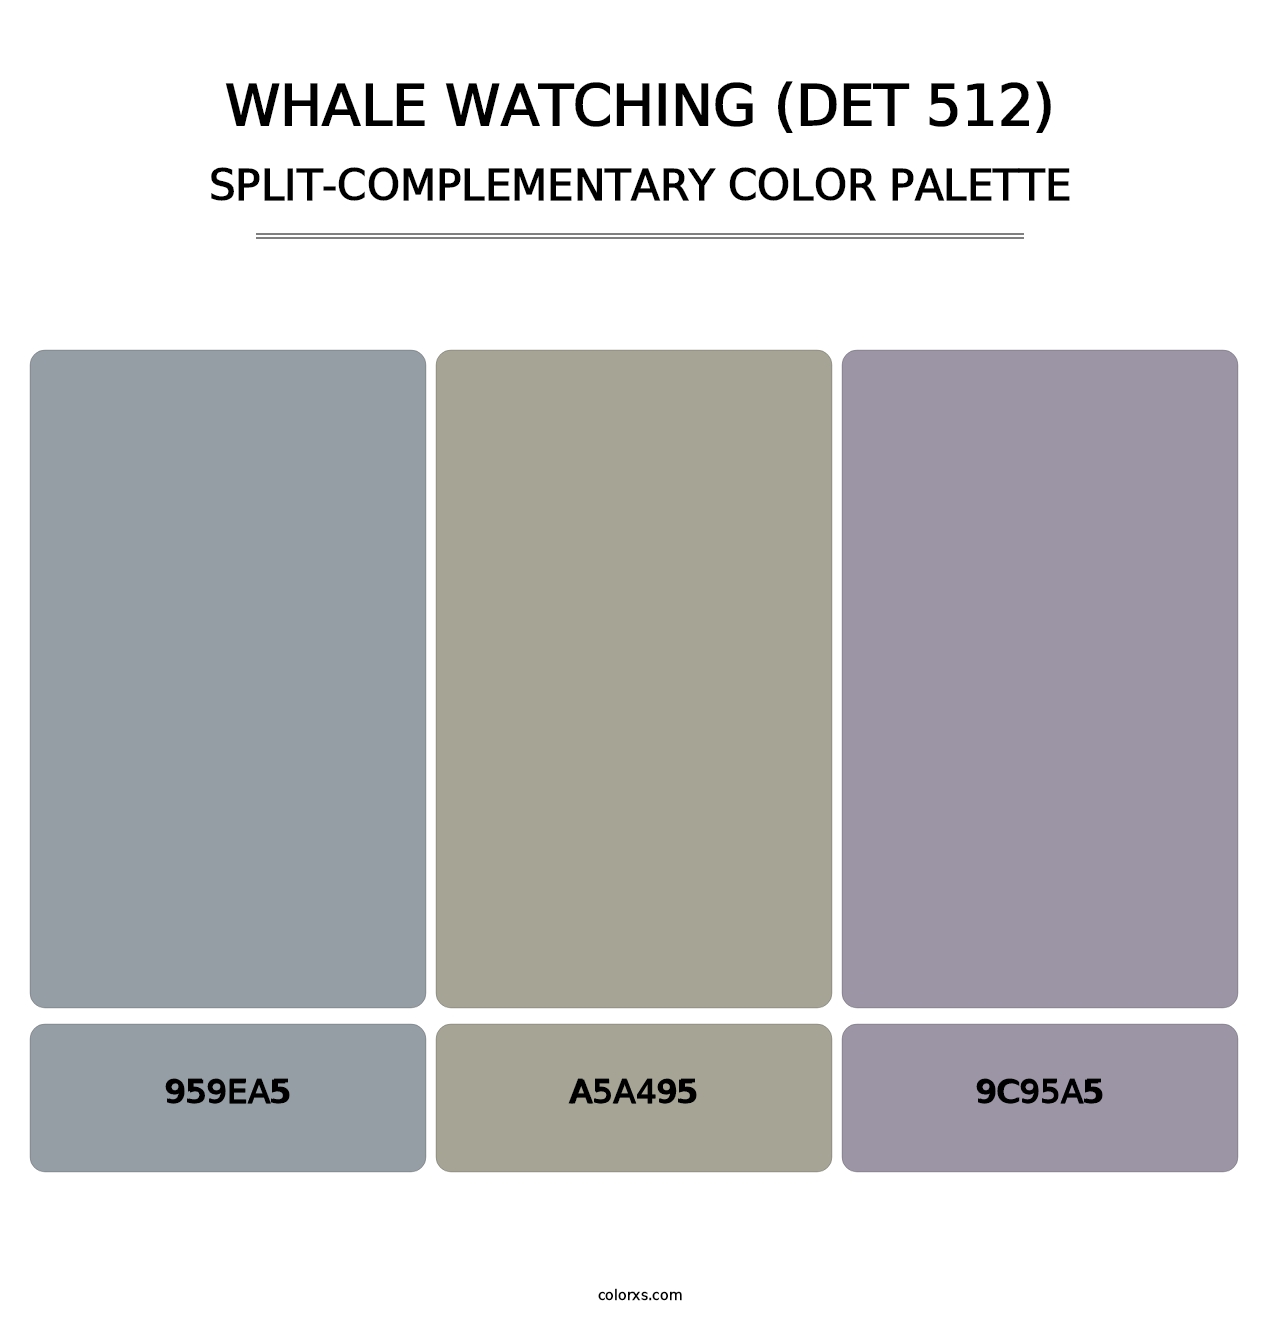 Whale Watching (DET 512) - Split-Complementary Color Palette